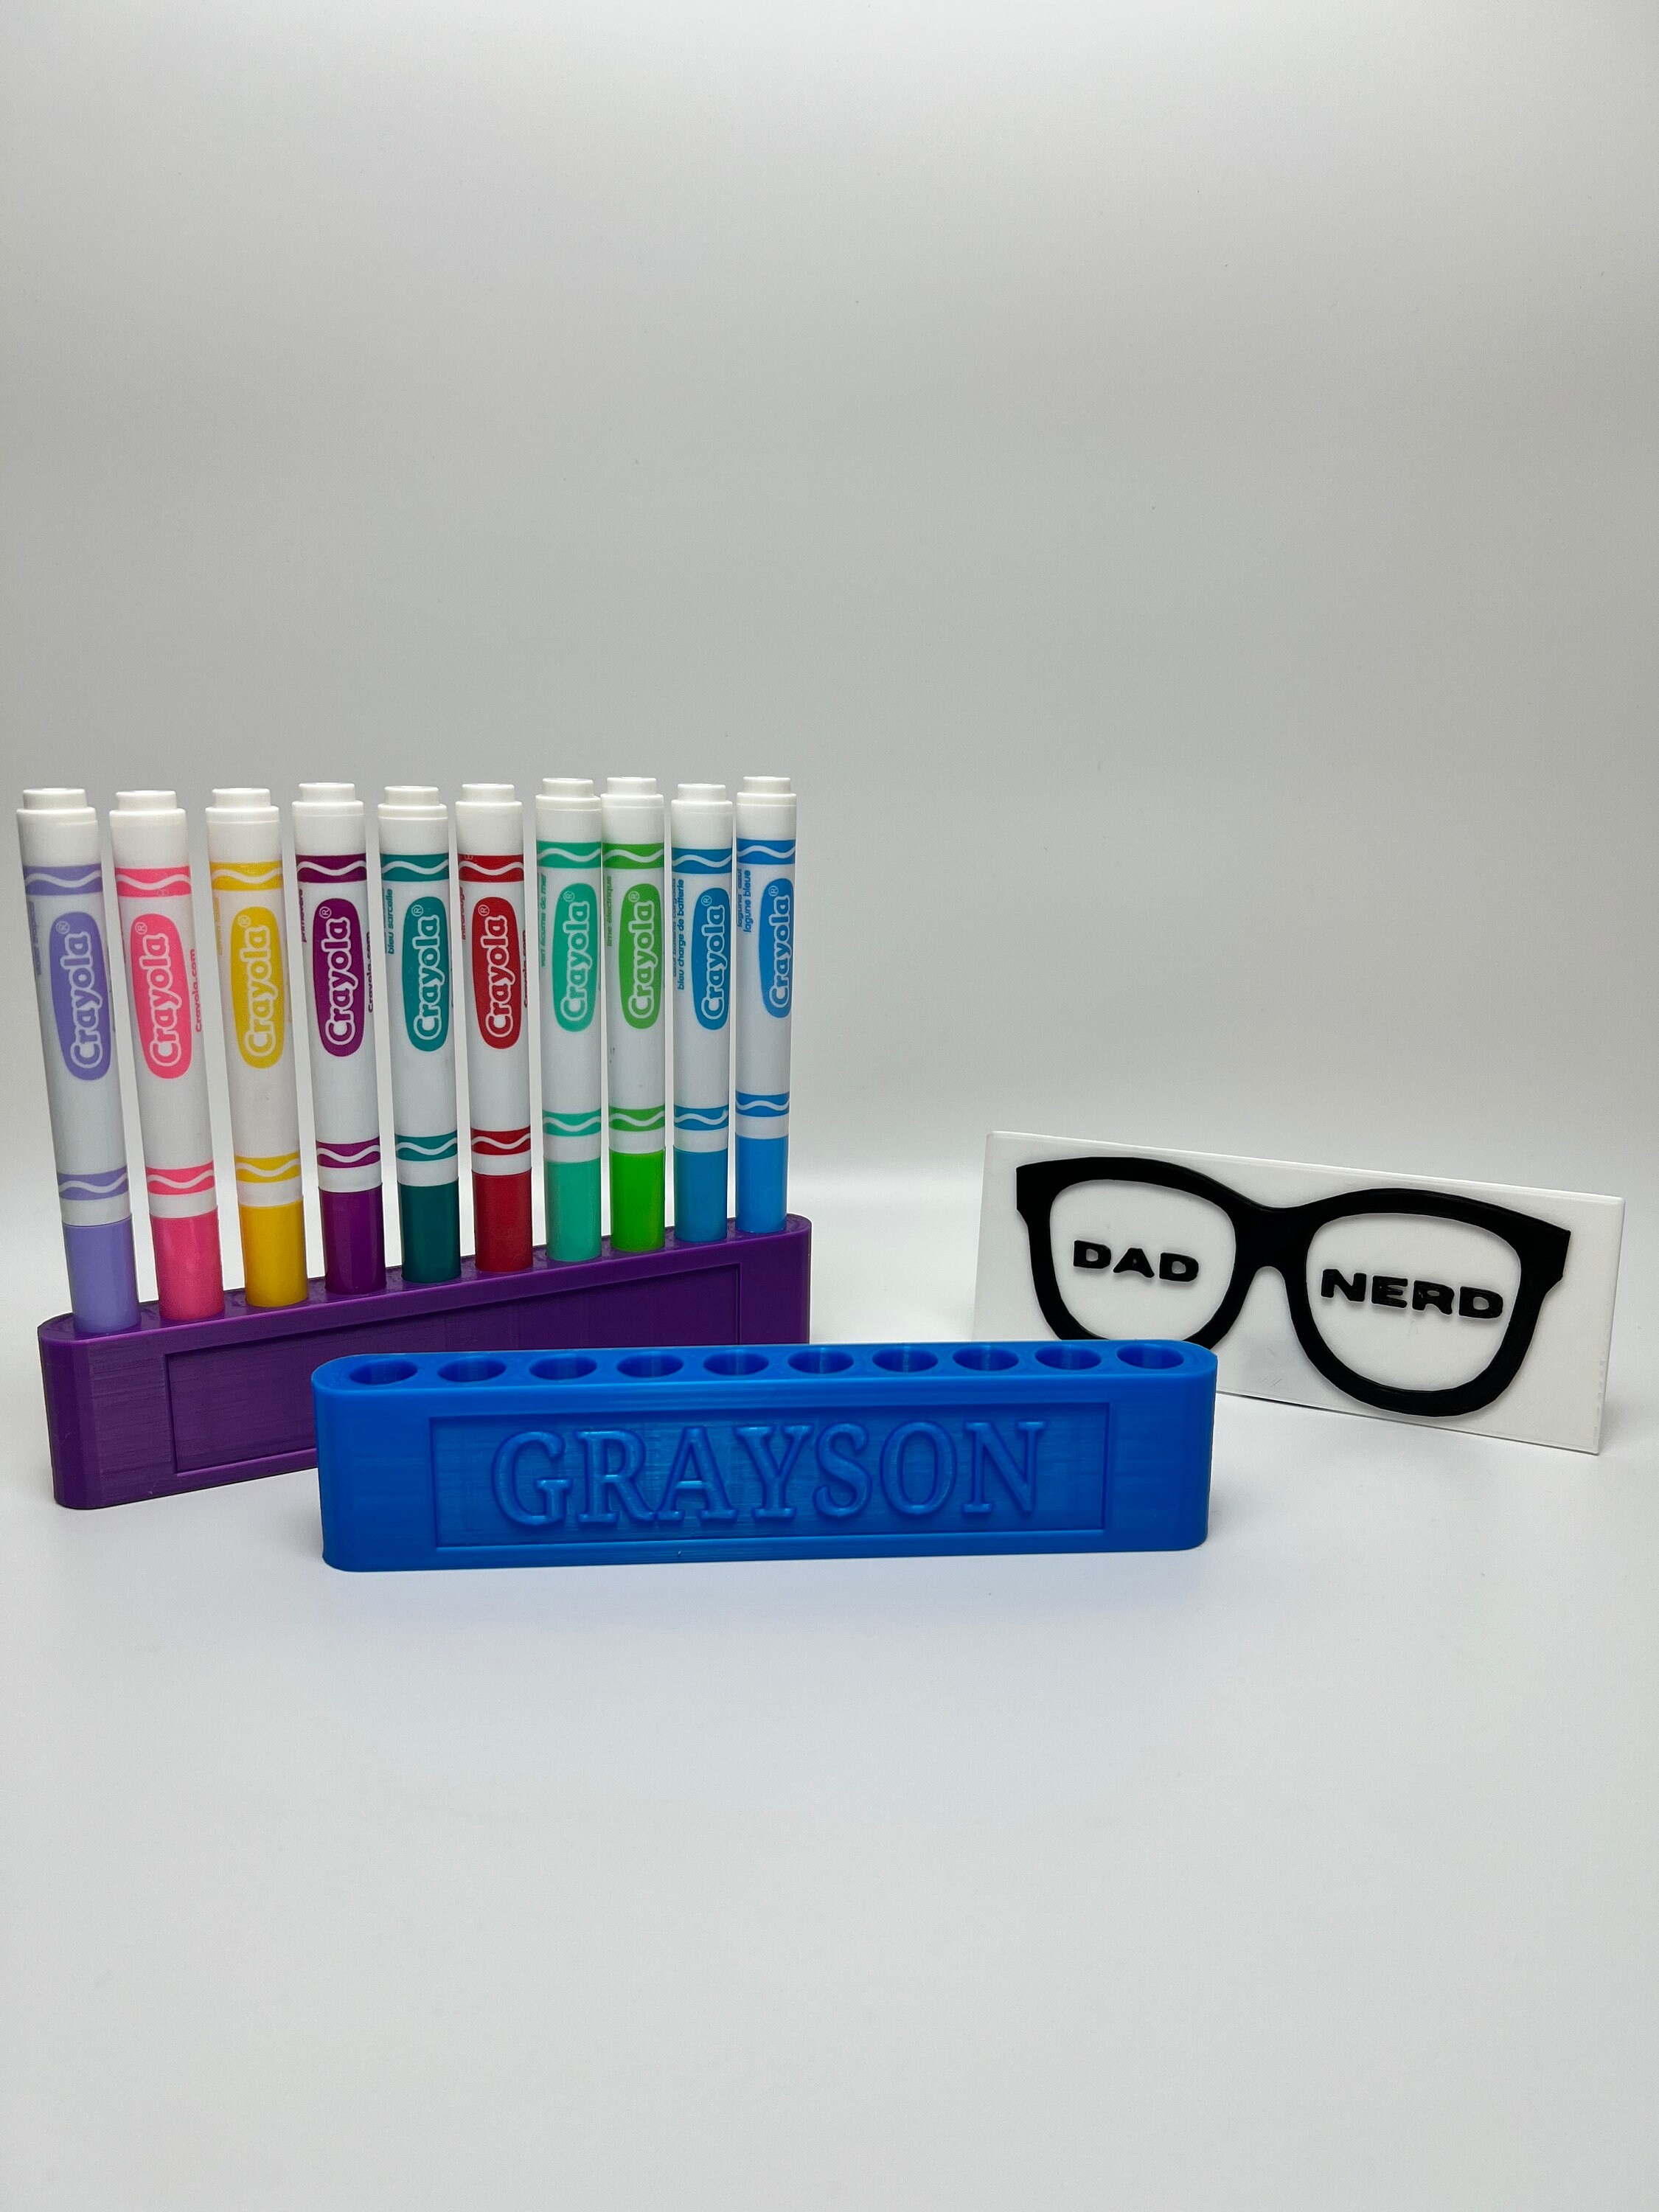 Personalized or Plain Marker Cap Holder for Small Fine Line Crayola Markers  Single Row 